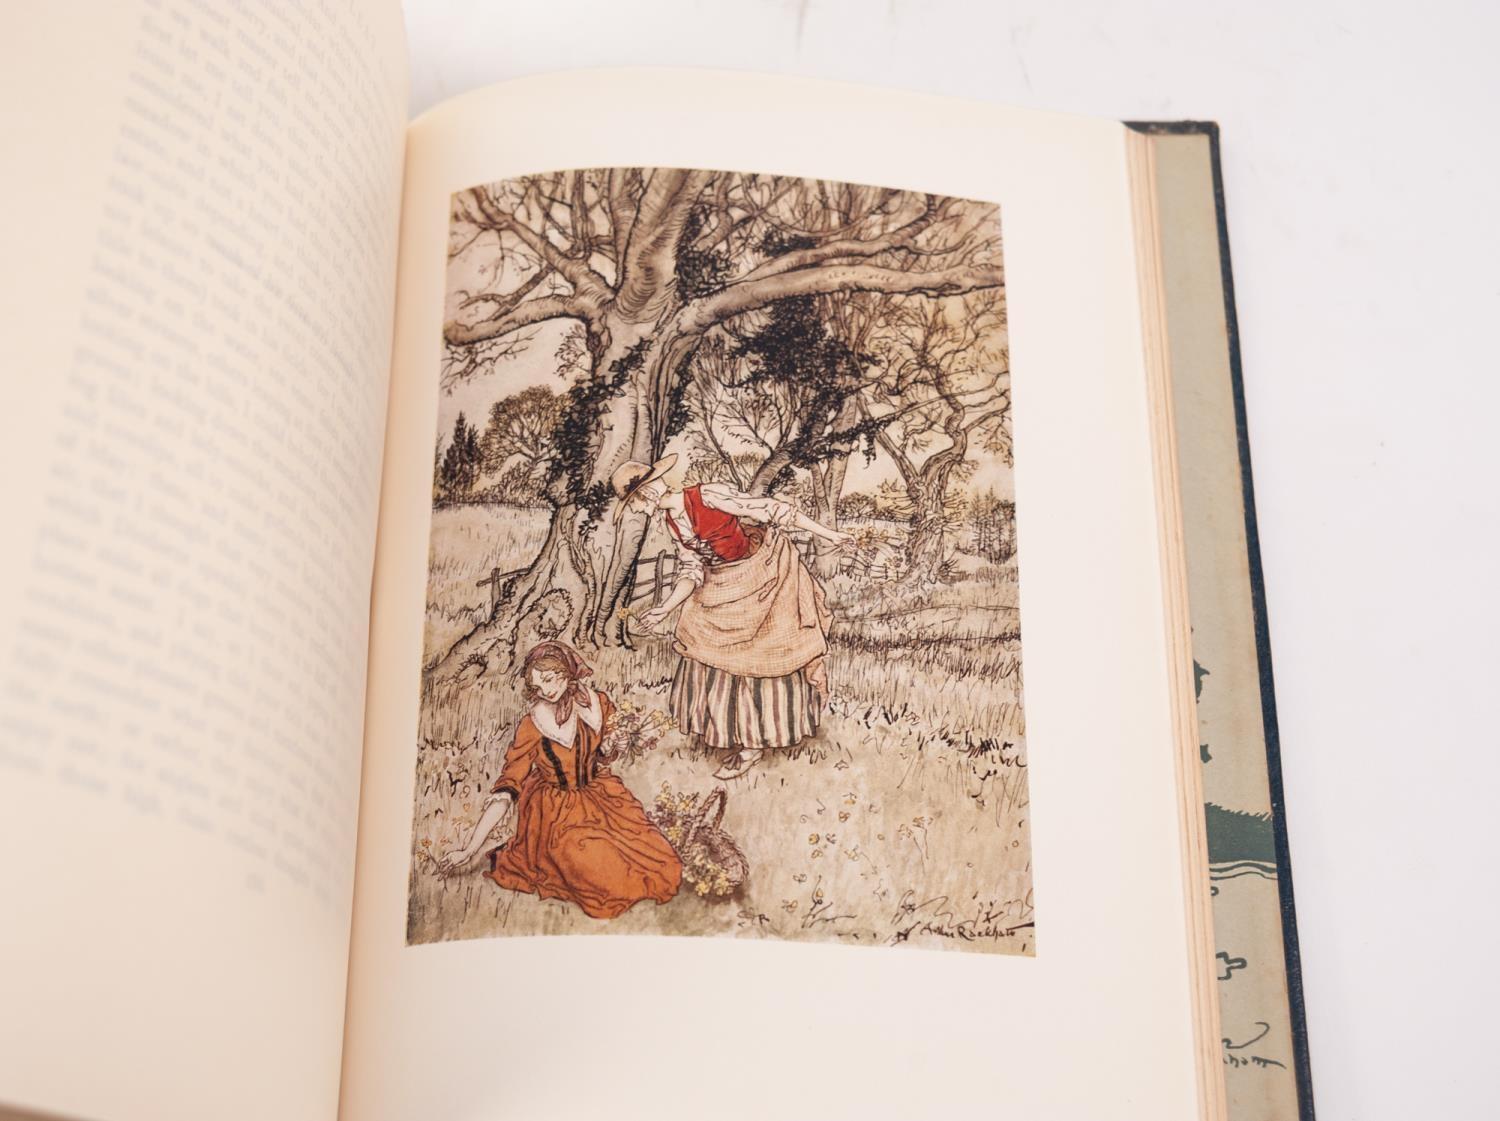 IZAAK WALTON - THE COMPLEAT ANGLER, illustrated by Arthur Rackham, 1931 1st Ed thus This the - Image 5 of 6